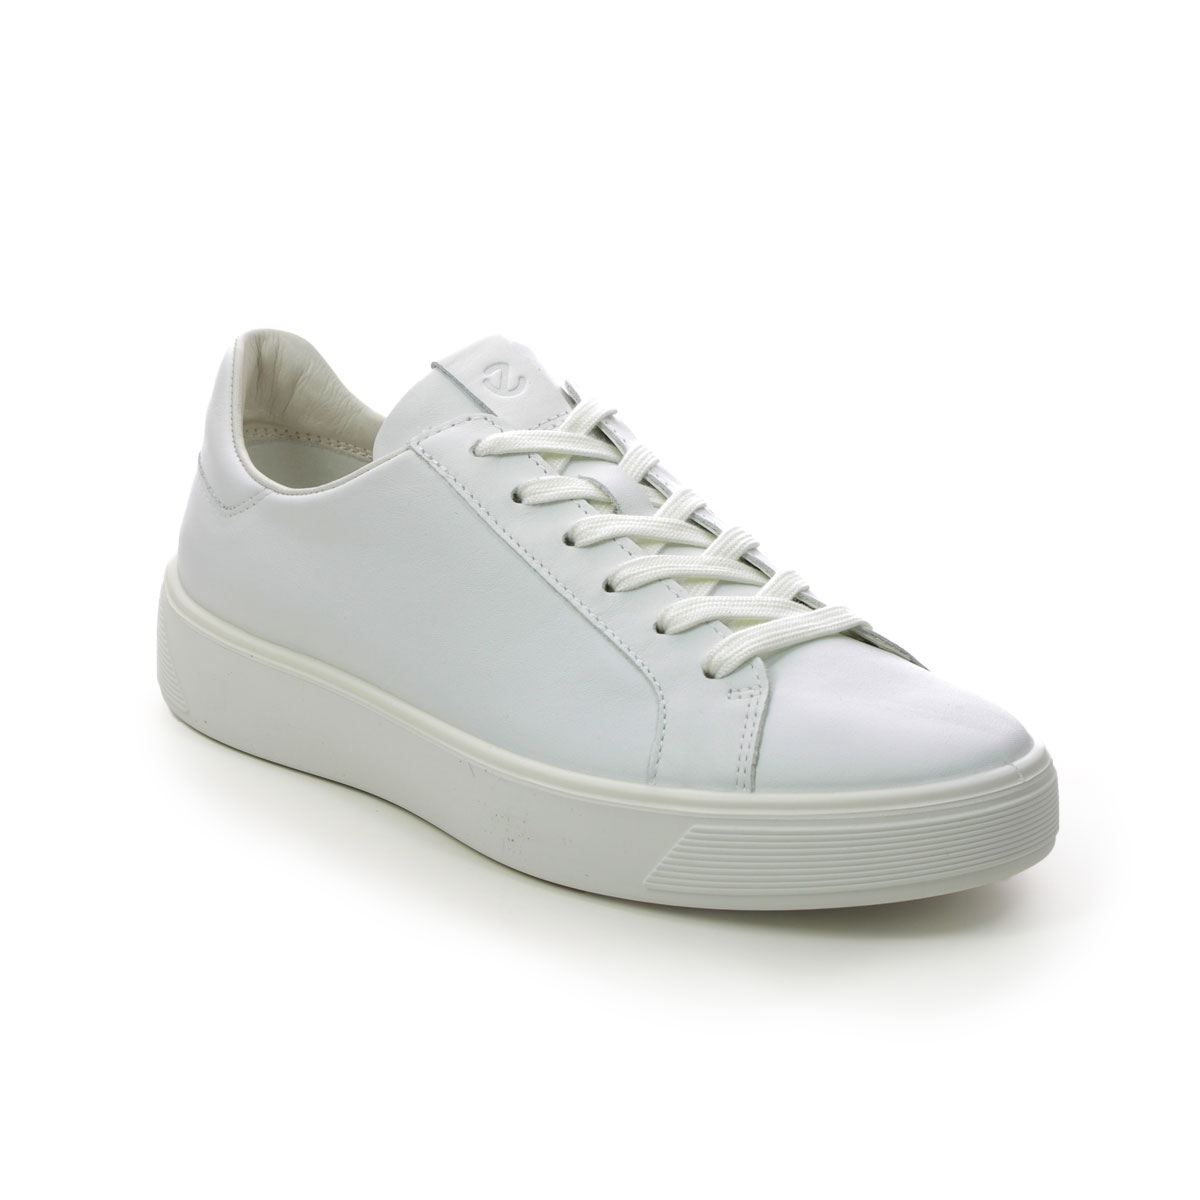 Ecco Street Tray W White Leather Womens Trainers 291143-01007 In Size 41 In Plain White Leather